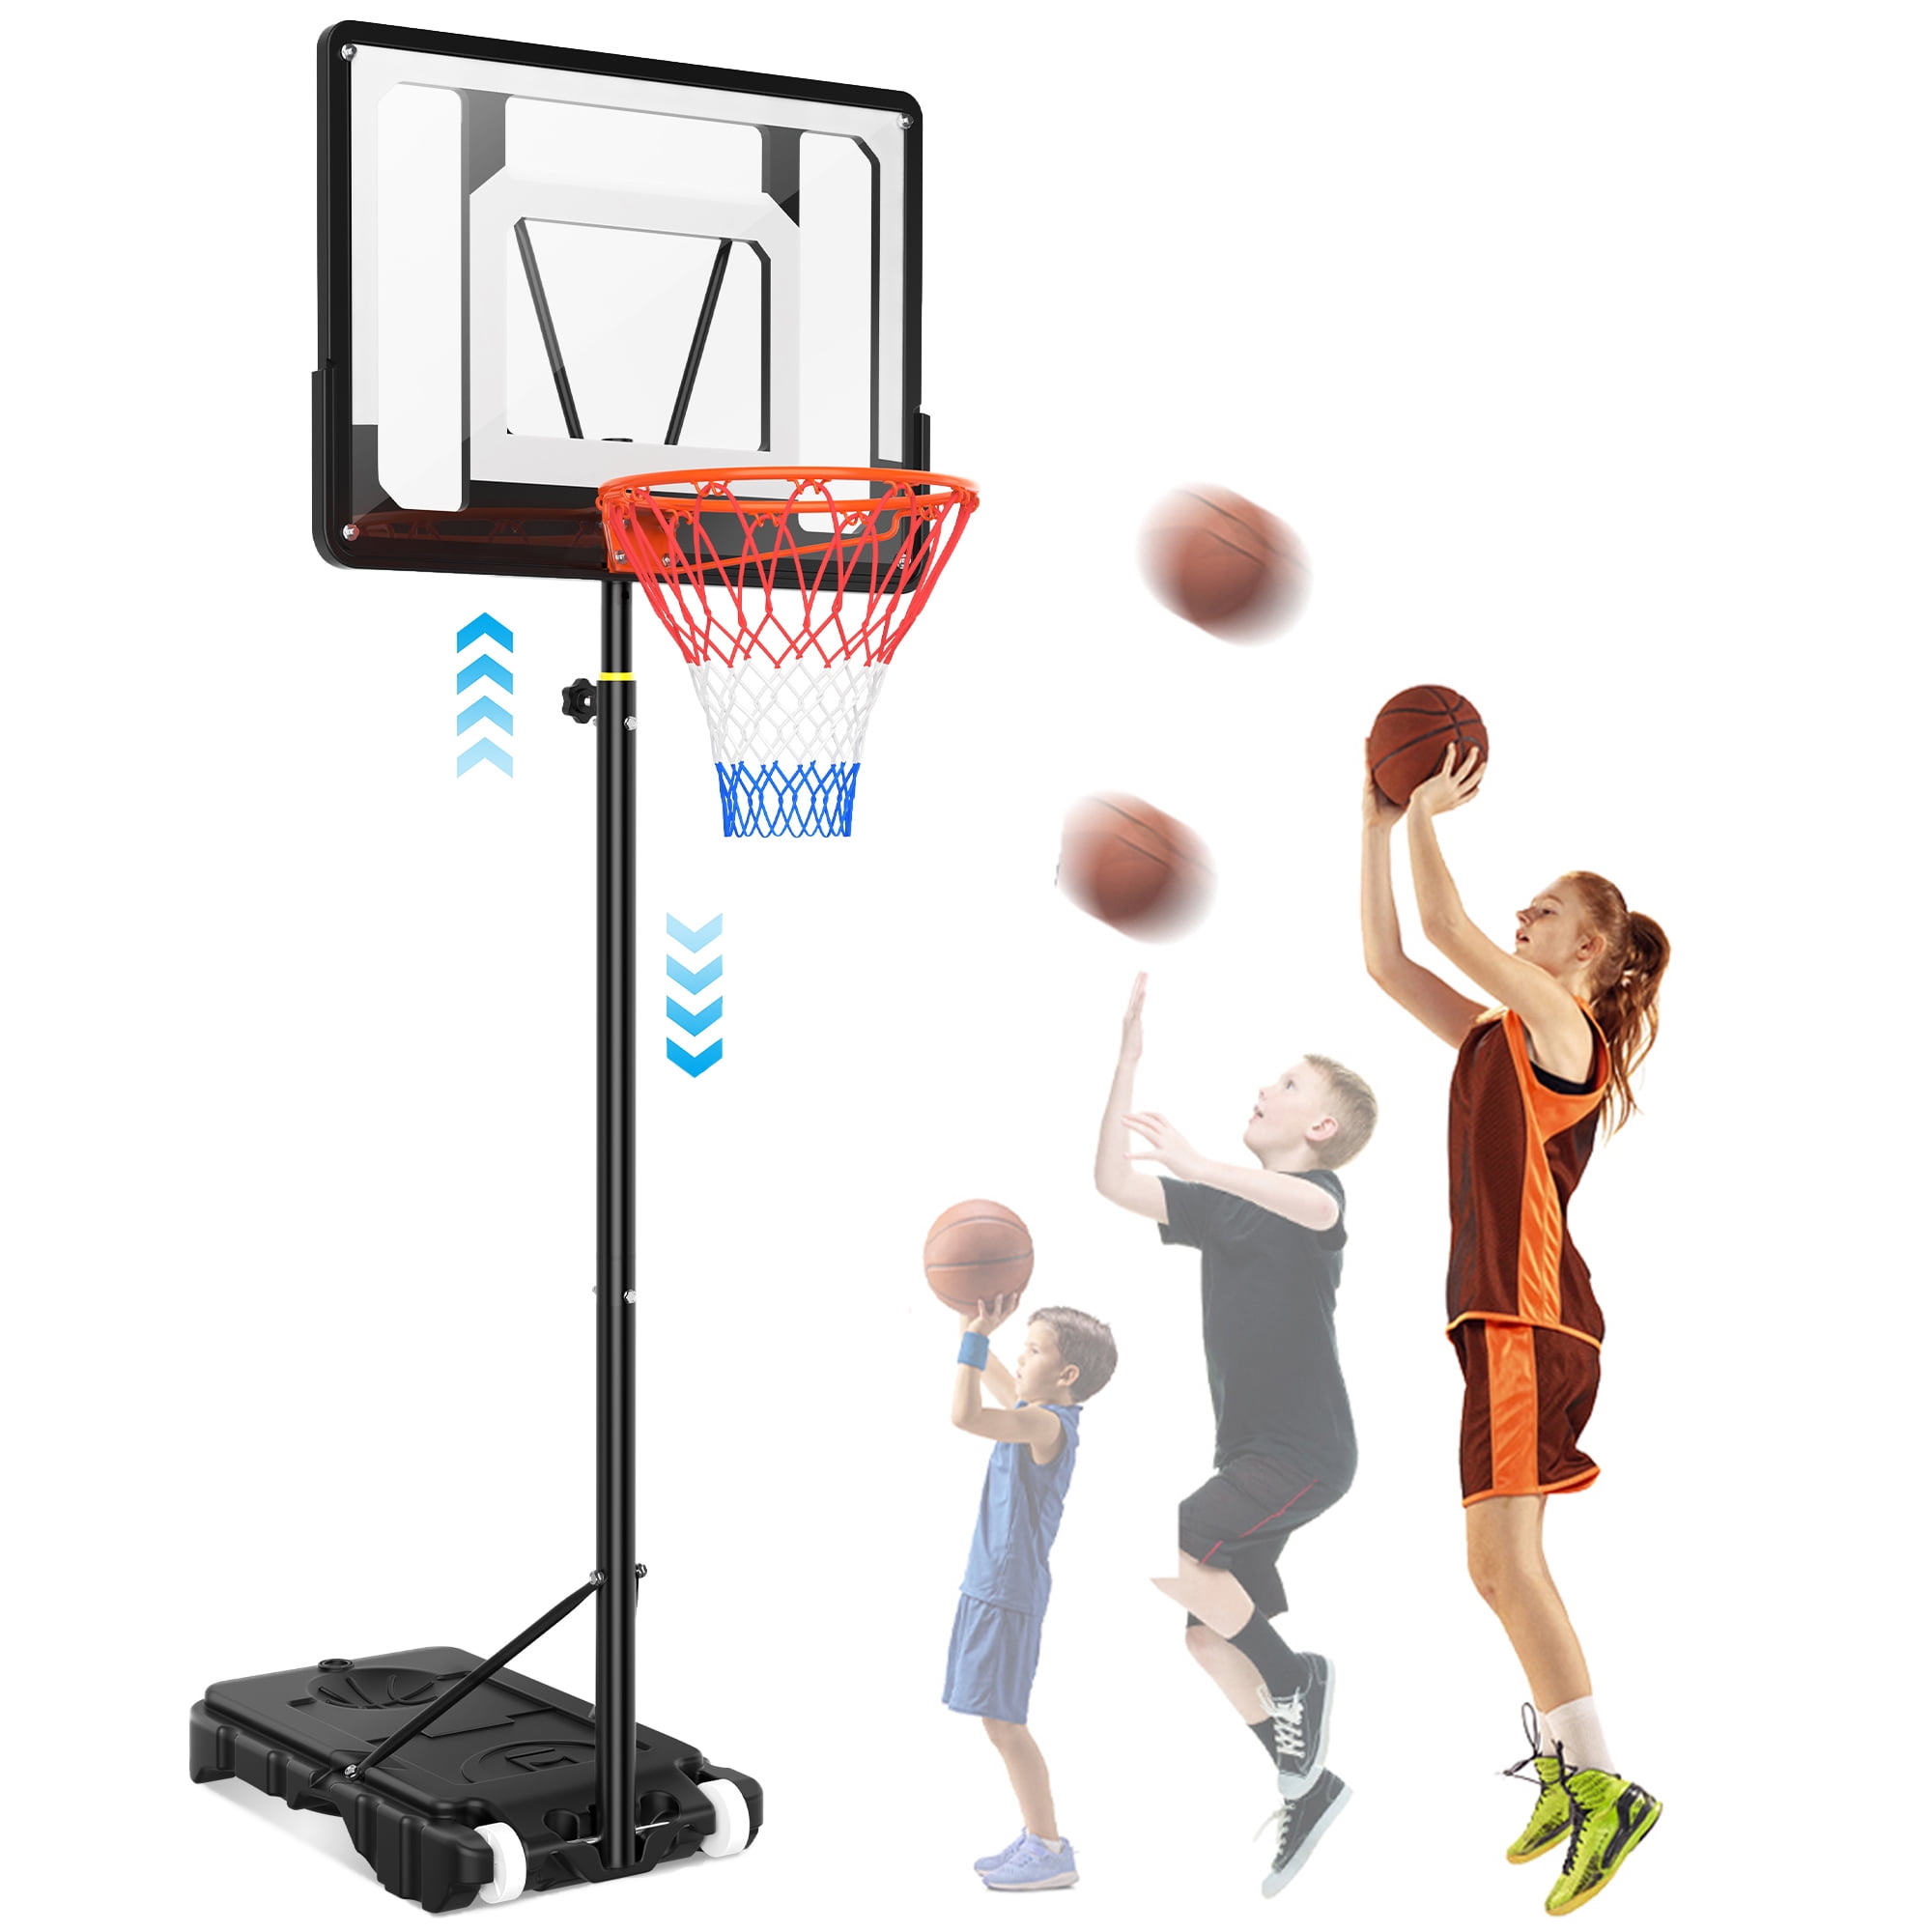 Best Basketball Net for Toddlers: Top Picks for Slam Dunk Fun!